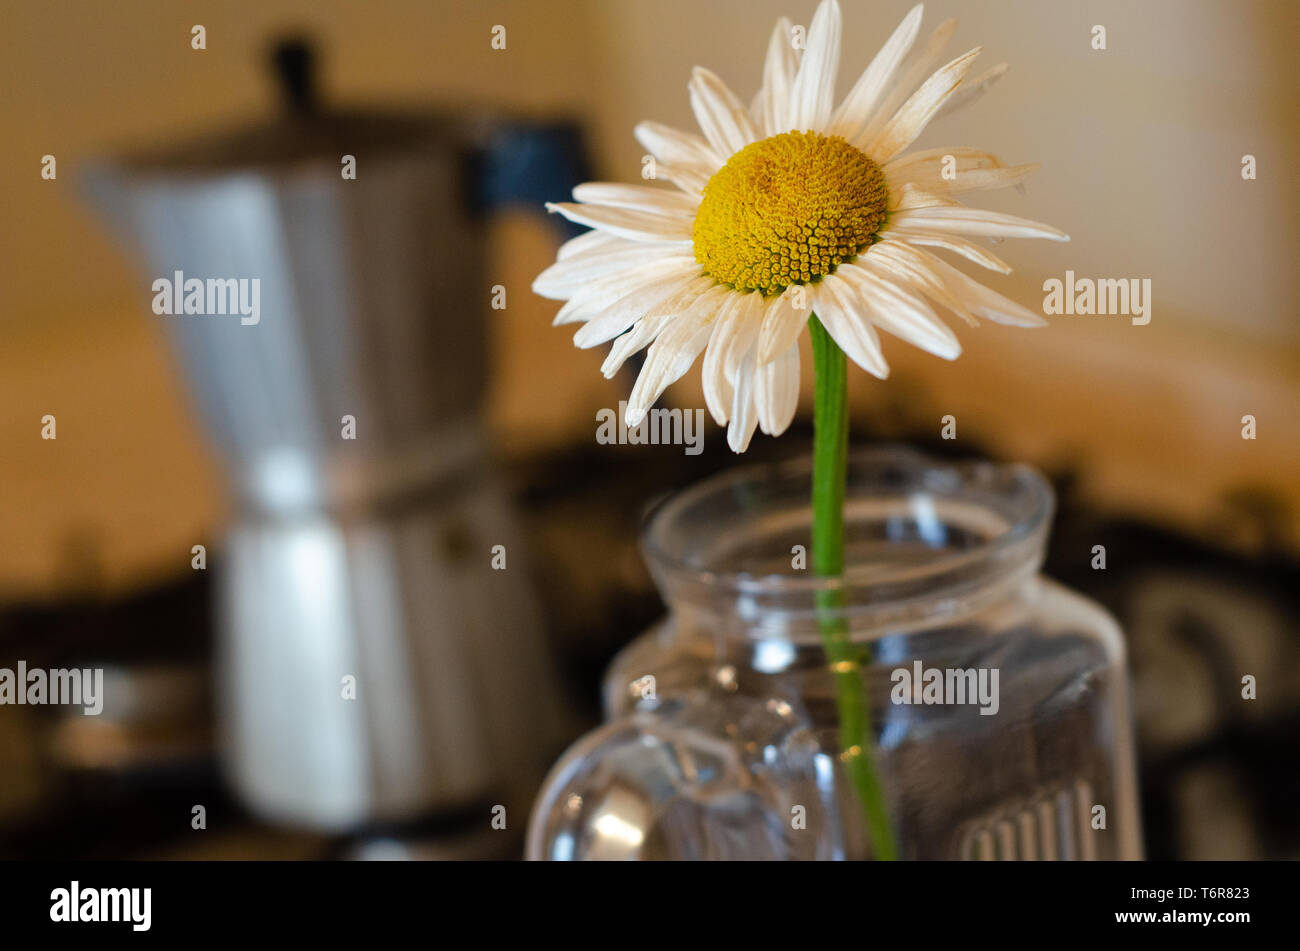 Pretty yellow Daisy in a jar with Italian style coffee pot in the background, kitchen, home. Stock Photo